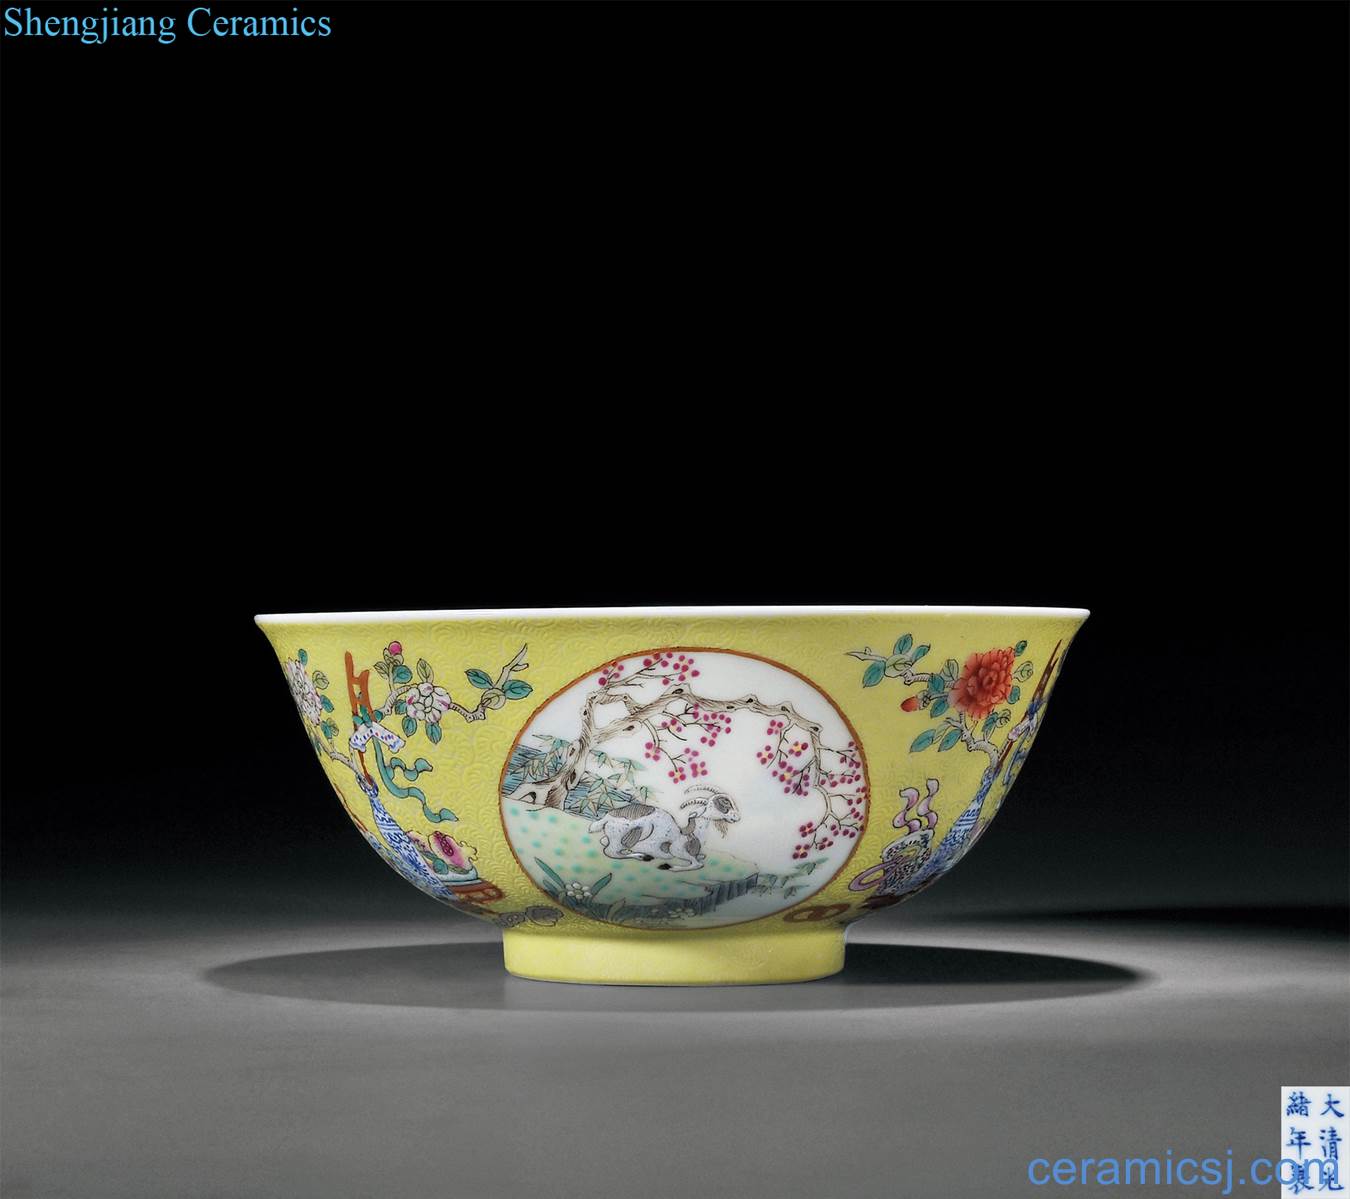 Blue and white flowers outside the lines in the reign of qing emperor guangxu to rolling way pastel yellow auspicious three Yang kaitai figure medallion bowl of fiddling while Rome burns